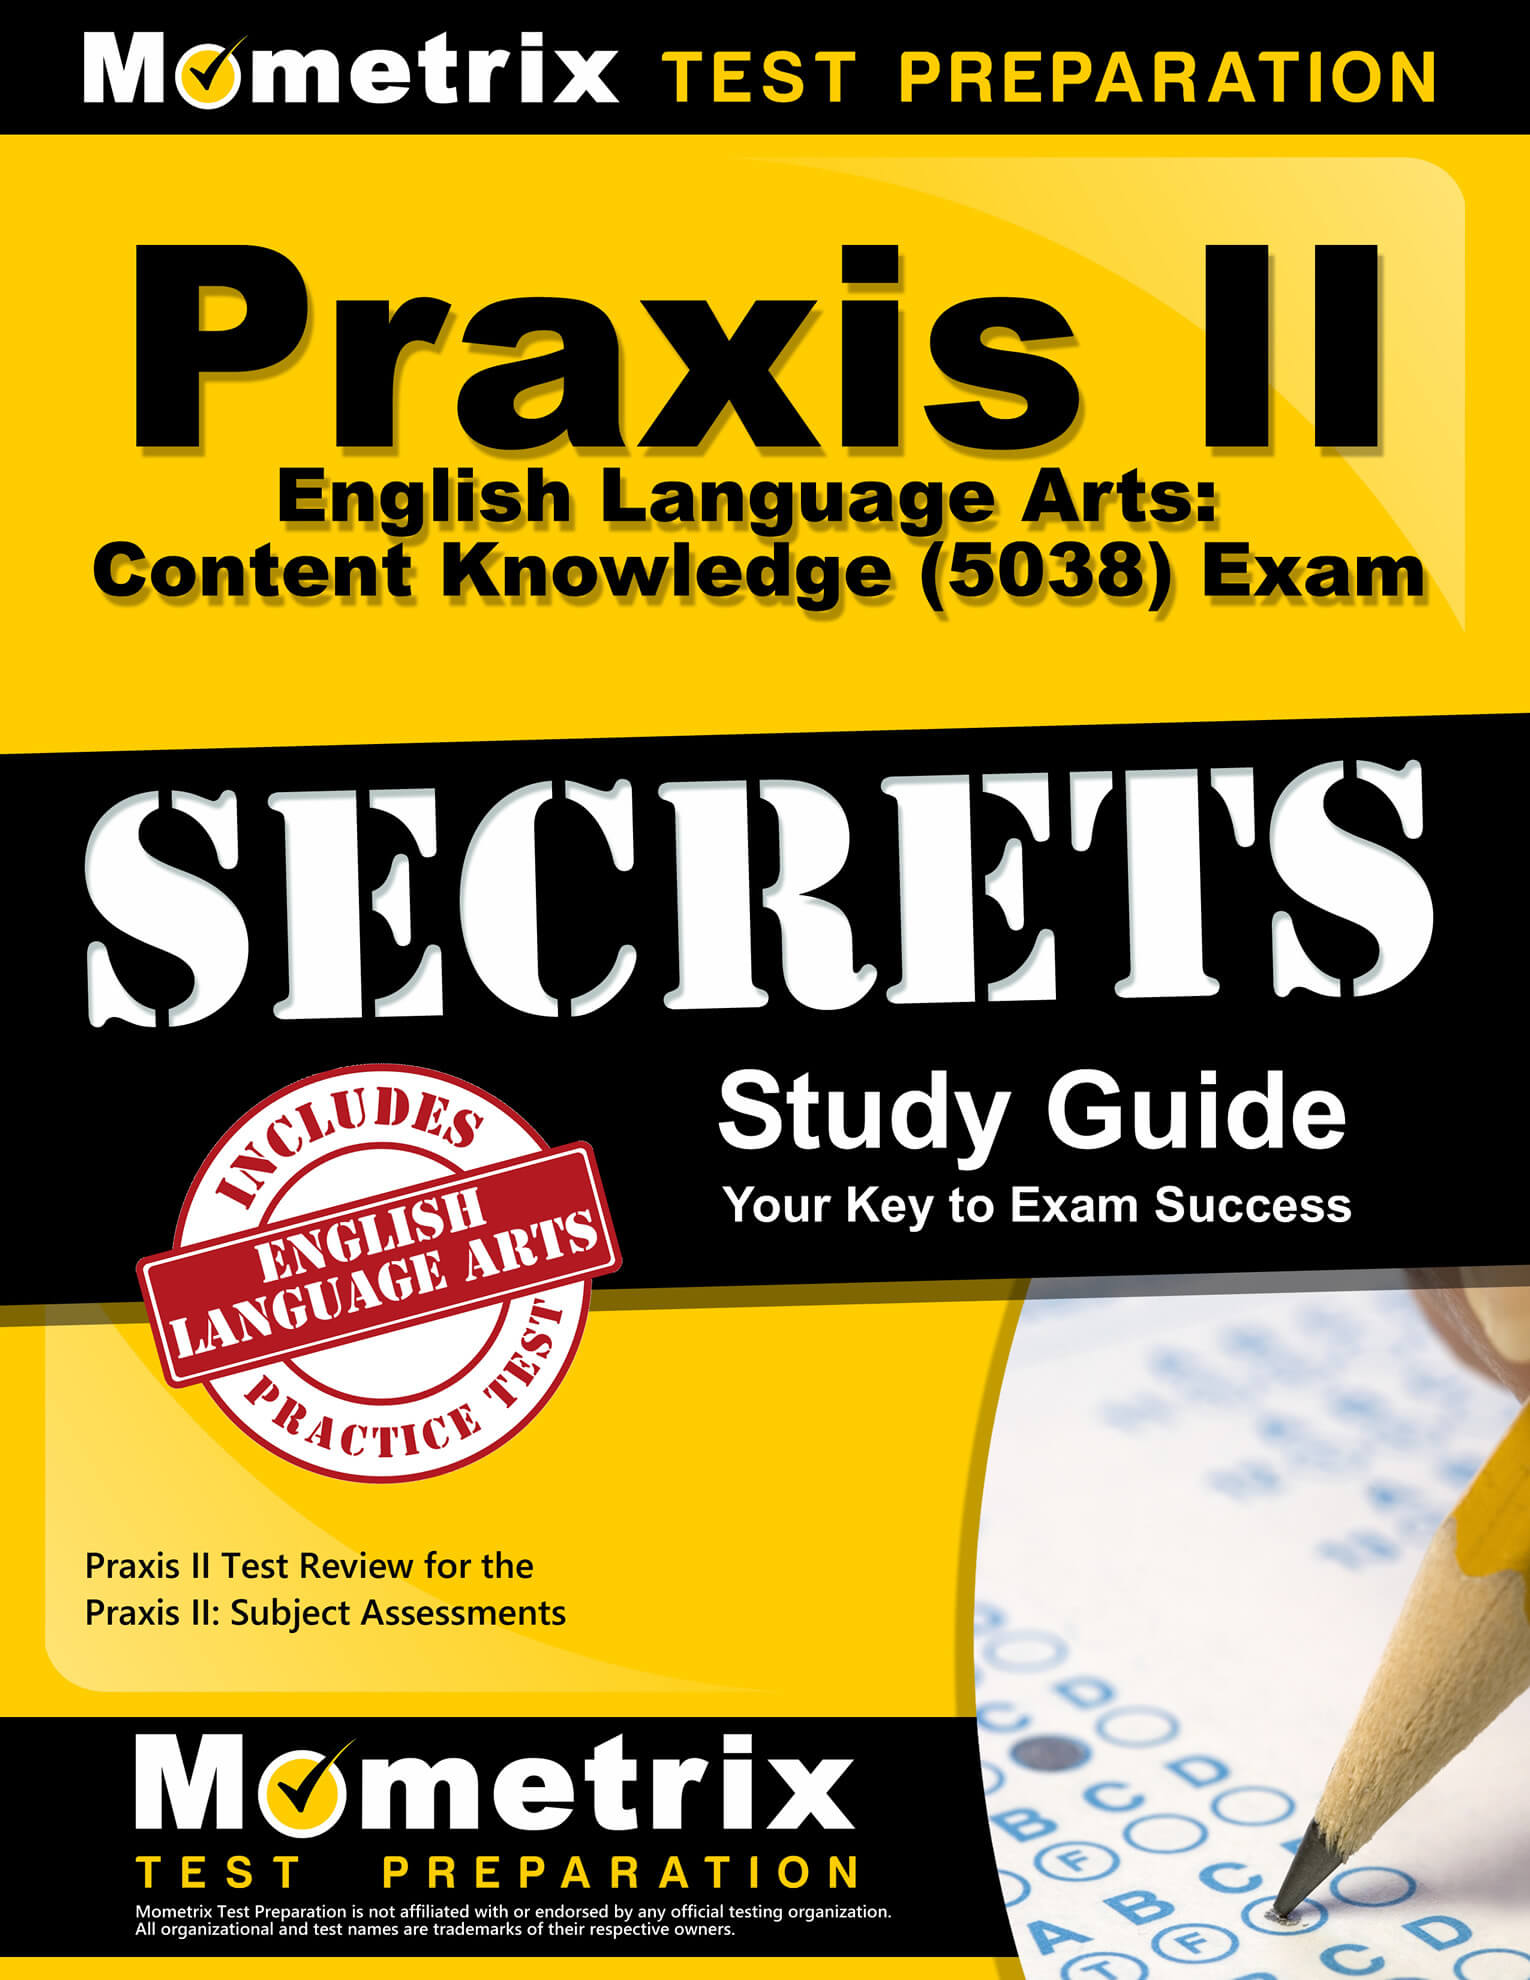 Praxis II English Language Arts: Content Knowledge Study Guide